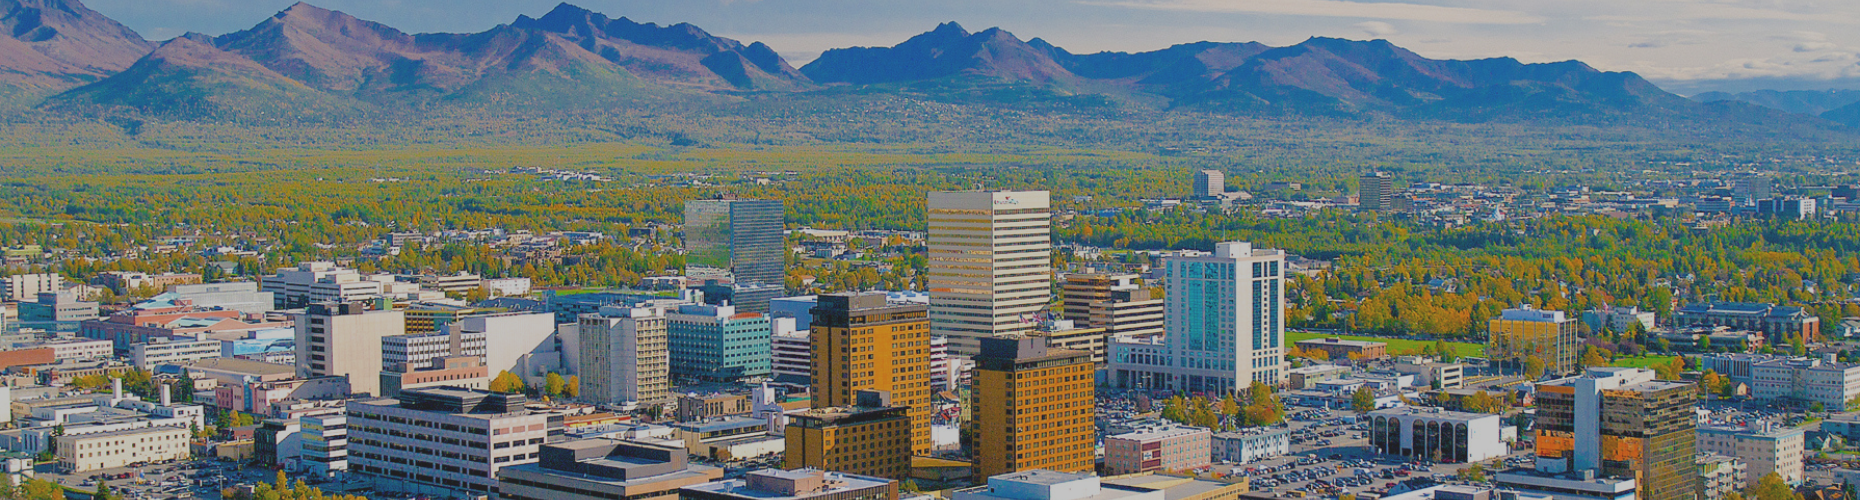 Anchorage skyline, with Chugach Range in the background and the iconic Captain Cook Hotel in the foreground